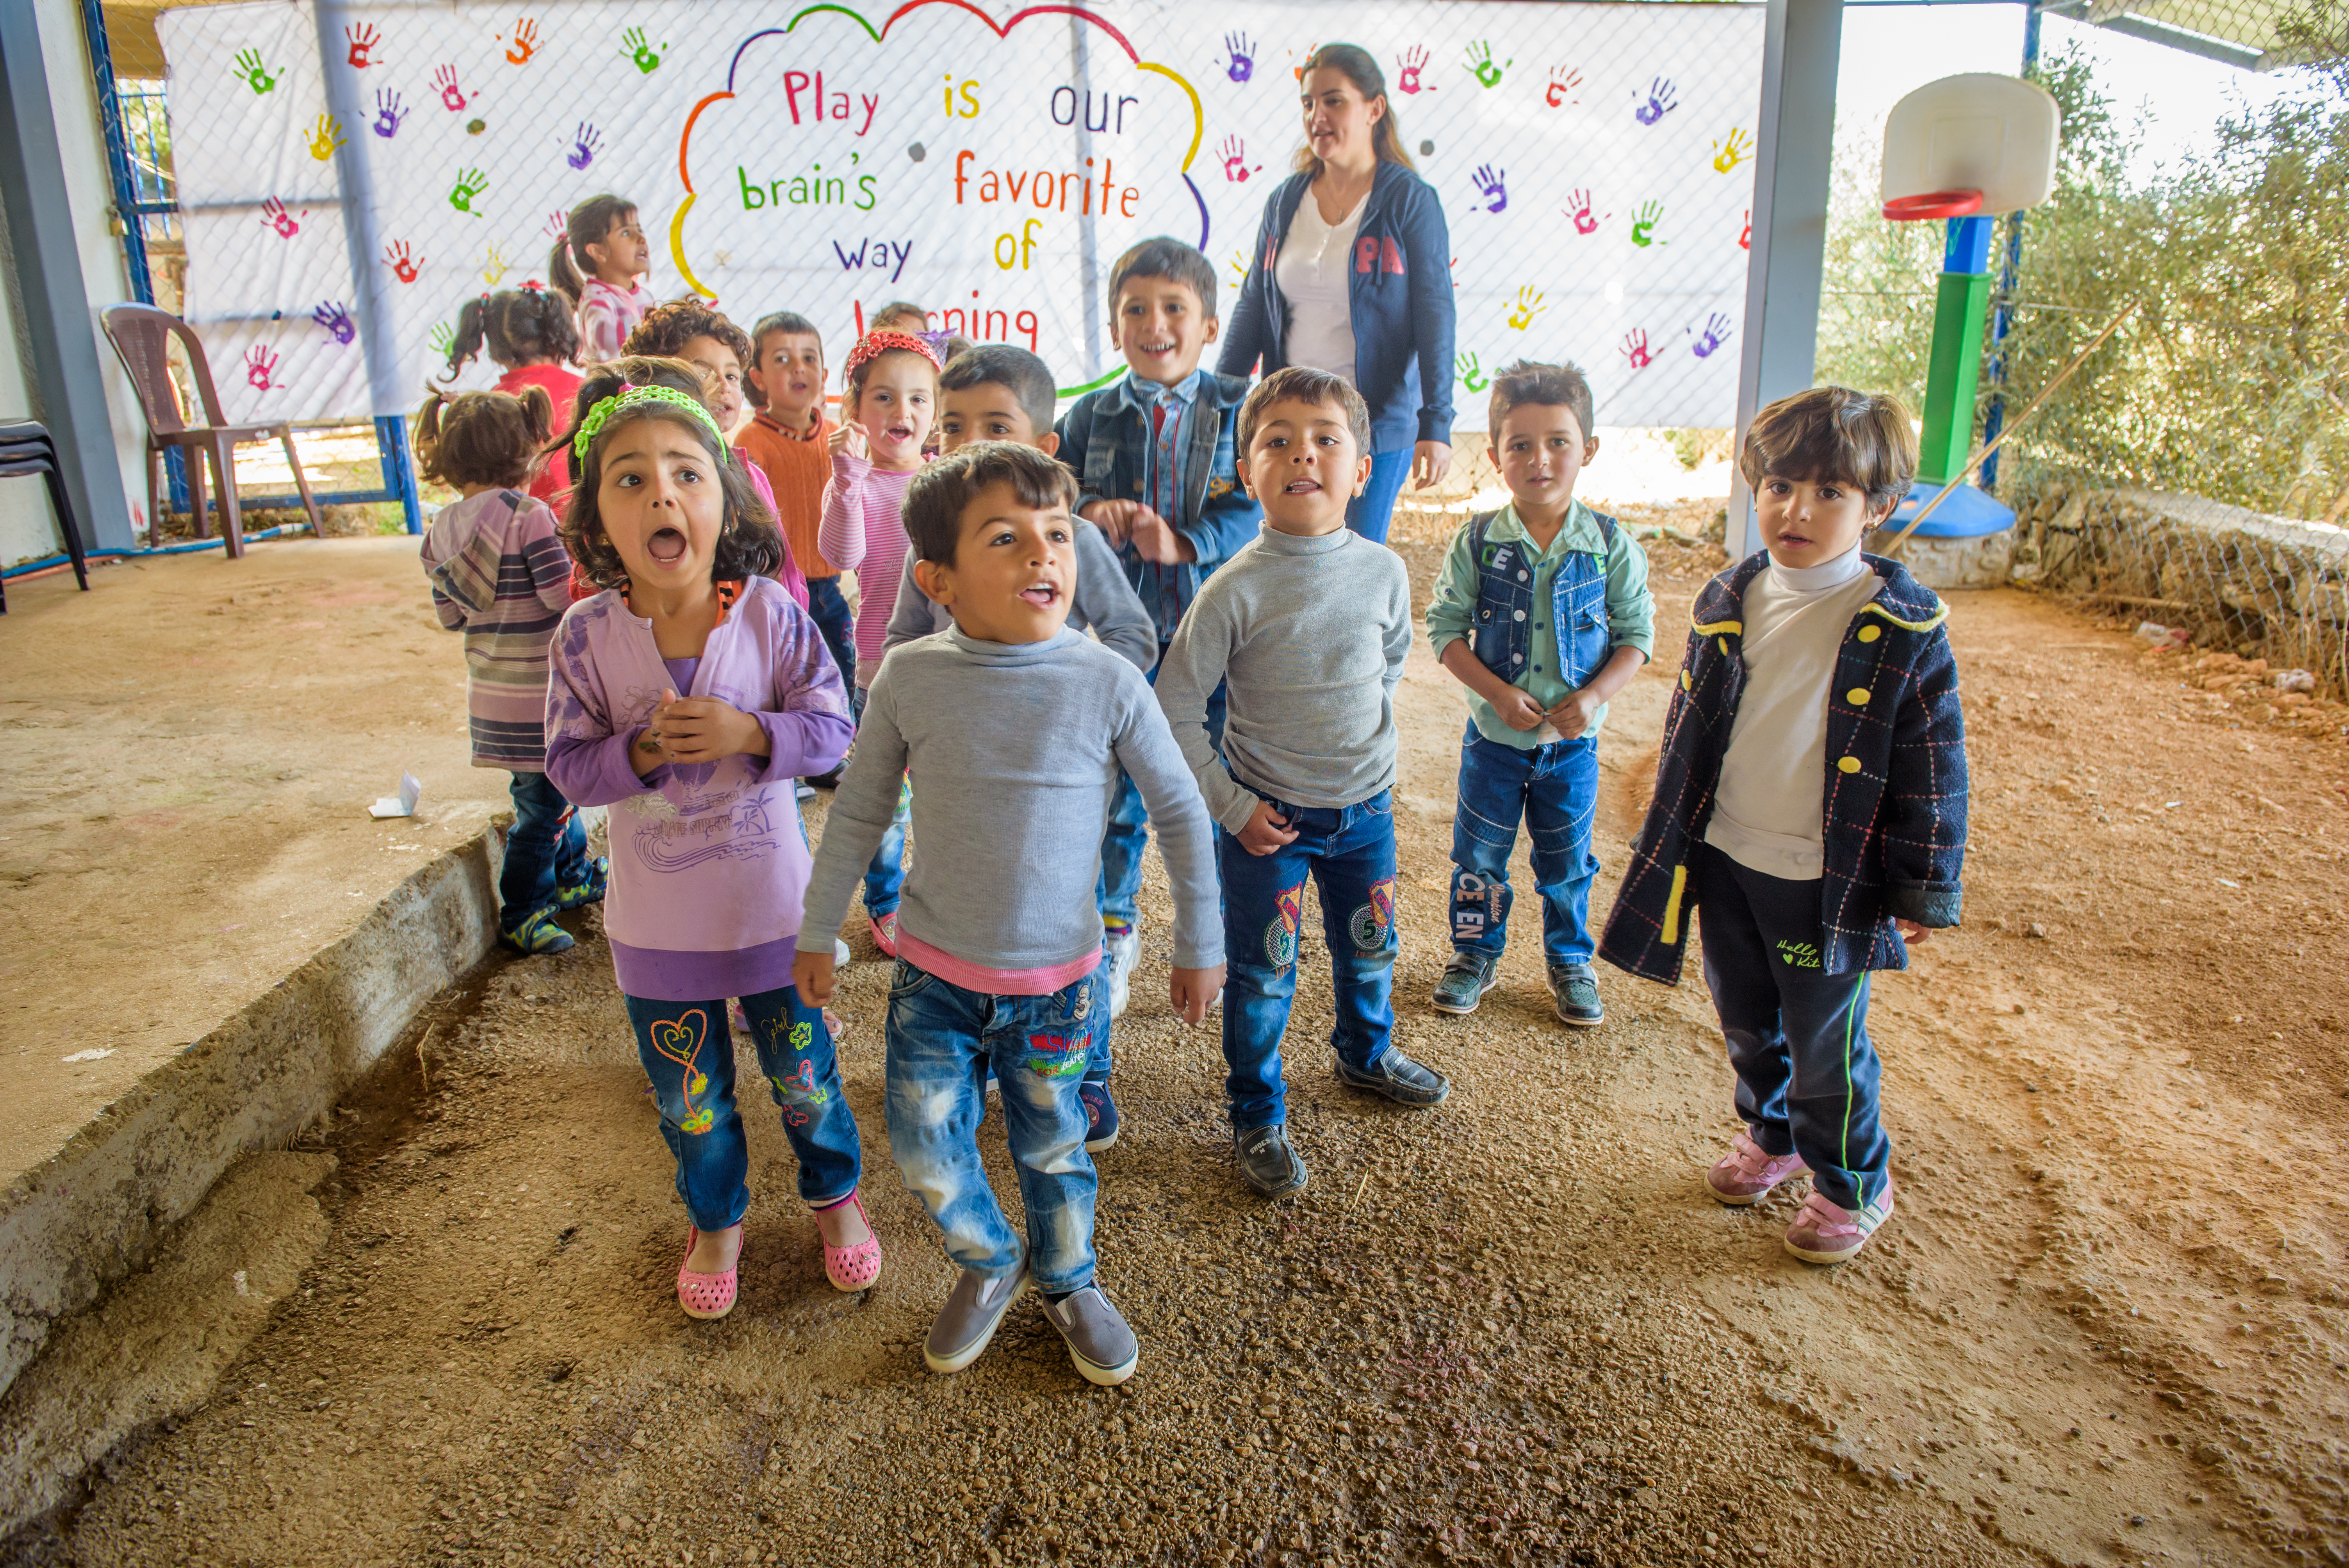 Group of children in Lebanon jump around in a classroom